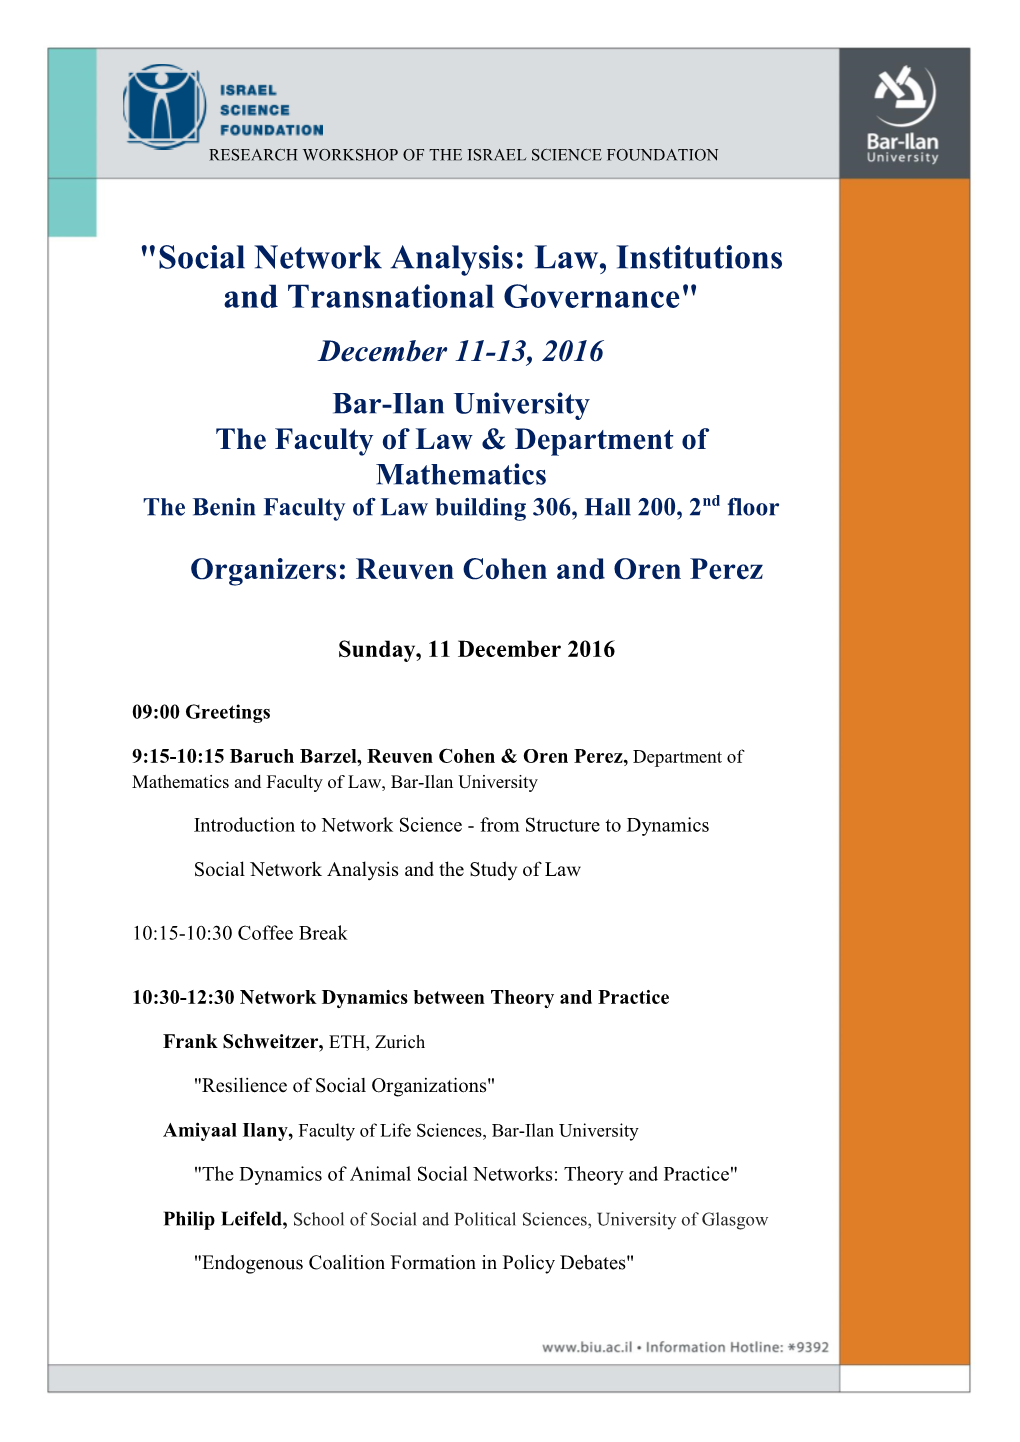 "Social Network Analysis: Law, Institutions and Transnational